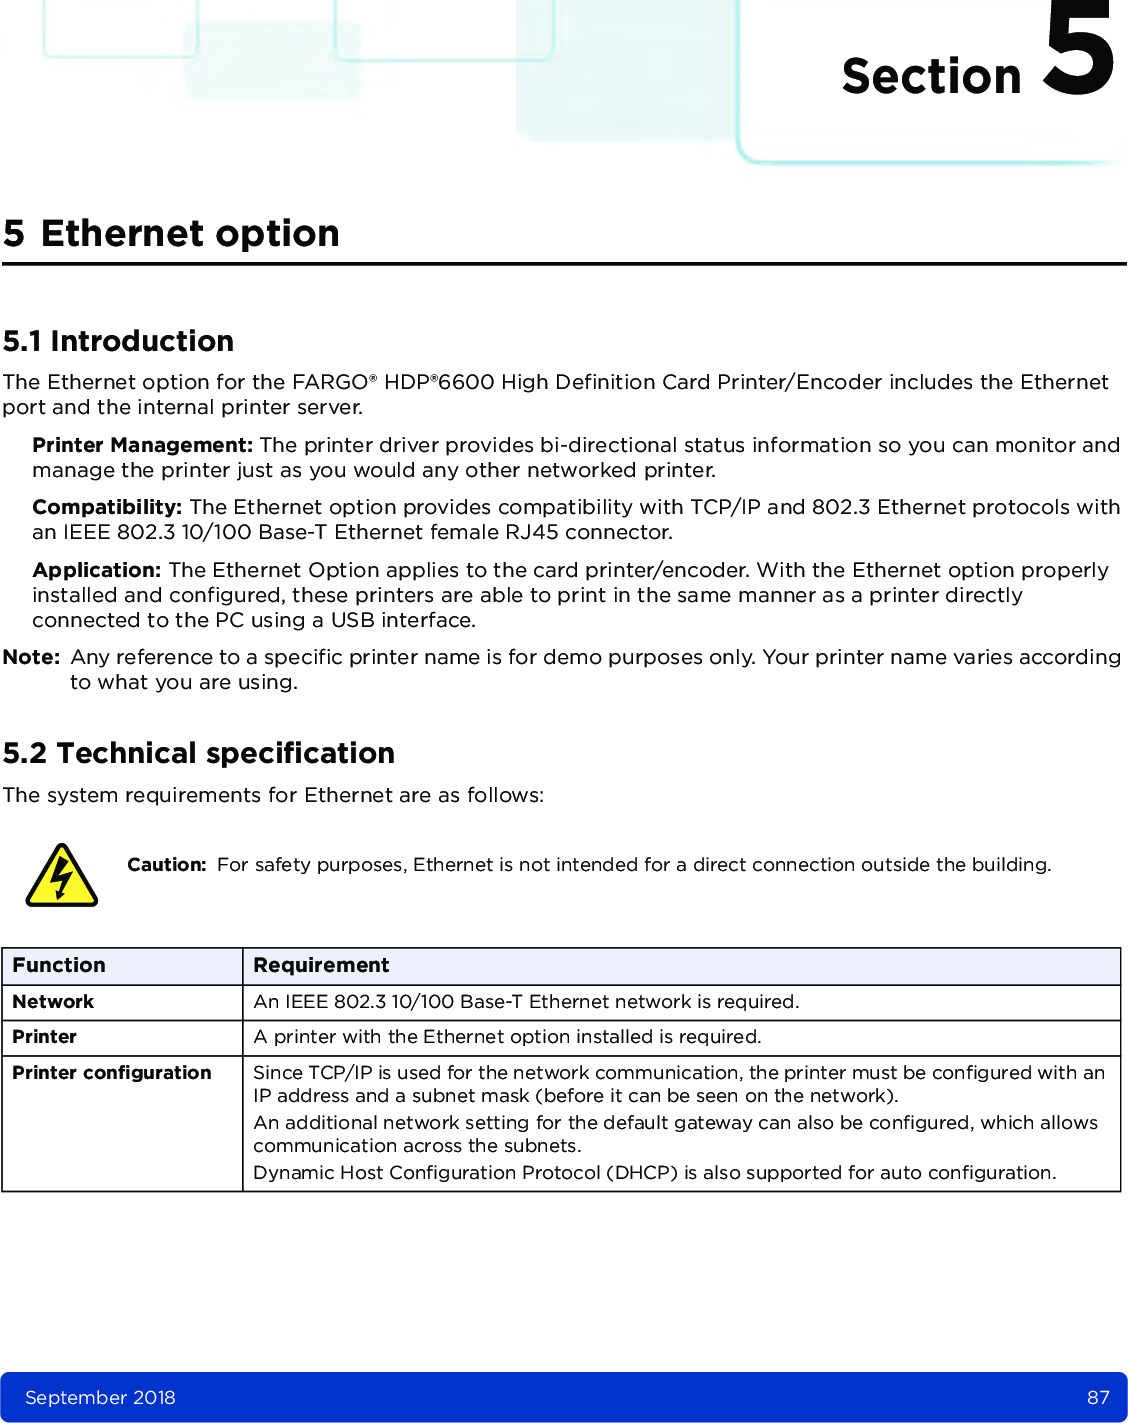 Section 5September 2018 875 Ethernet option5.1 IntroductionThe Ethernet option for the FARGO® HDP®6600 High Definition Card Printer/Encoder includes the Ethernet port and the internal printer server. Printer Management: The printer driver provides bi-directional status information so you can monitor and manage the printer just as you would any other networked printer. Compatibility: The Ethernet option provides compatibility with TCP/IP and 802.3 Ethernet protocols with an IEEE 802.3 10/100 Base-T Ethernet female RJ45 connector. Application: The Ethernet Option applies to the card printer/encoder. With the Ethernet option properly installed and configured, these printers are able to print in the same manner as a printer directly connected to the PC using a USB interface.Note: Any reference to a specific printer name is for demo purposes only. Your printer name varies according to what you are using. 5.2 Technical specificationThe system requirements for Ethernet are as follows: Caution: For safety purposes, Ethernet is not intended for a direct connection outside the building.Function RequirementNetwork An IEEE 802.3 10/100 Base-T Ethernet network is required.Printer A printer with the Ethernet option installed is required.Printer configuration Since TCP/IP is used for the network communication, the printer must be configured with an IP address and a subnet mask (before it can be seen on the network). An additional network setting for the default gateway can also be configured, which allows communication across the subnets.Dynamic Host Configuration Protocol (DHCP) is also supported for auto configuration.